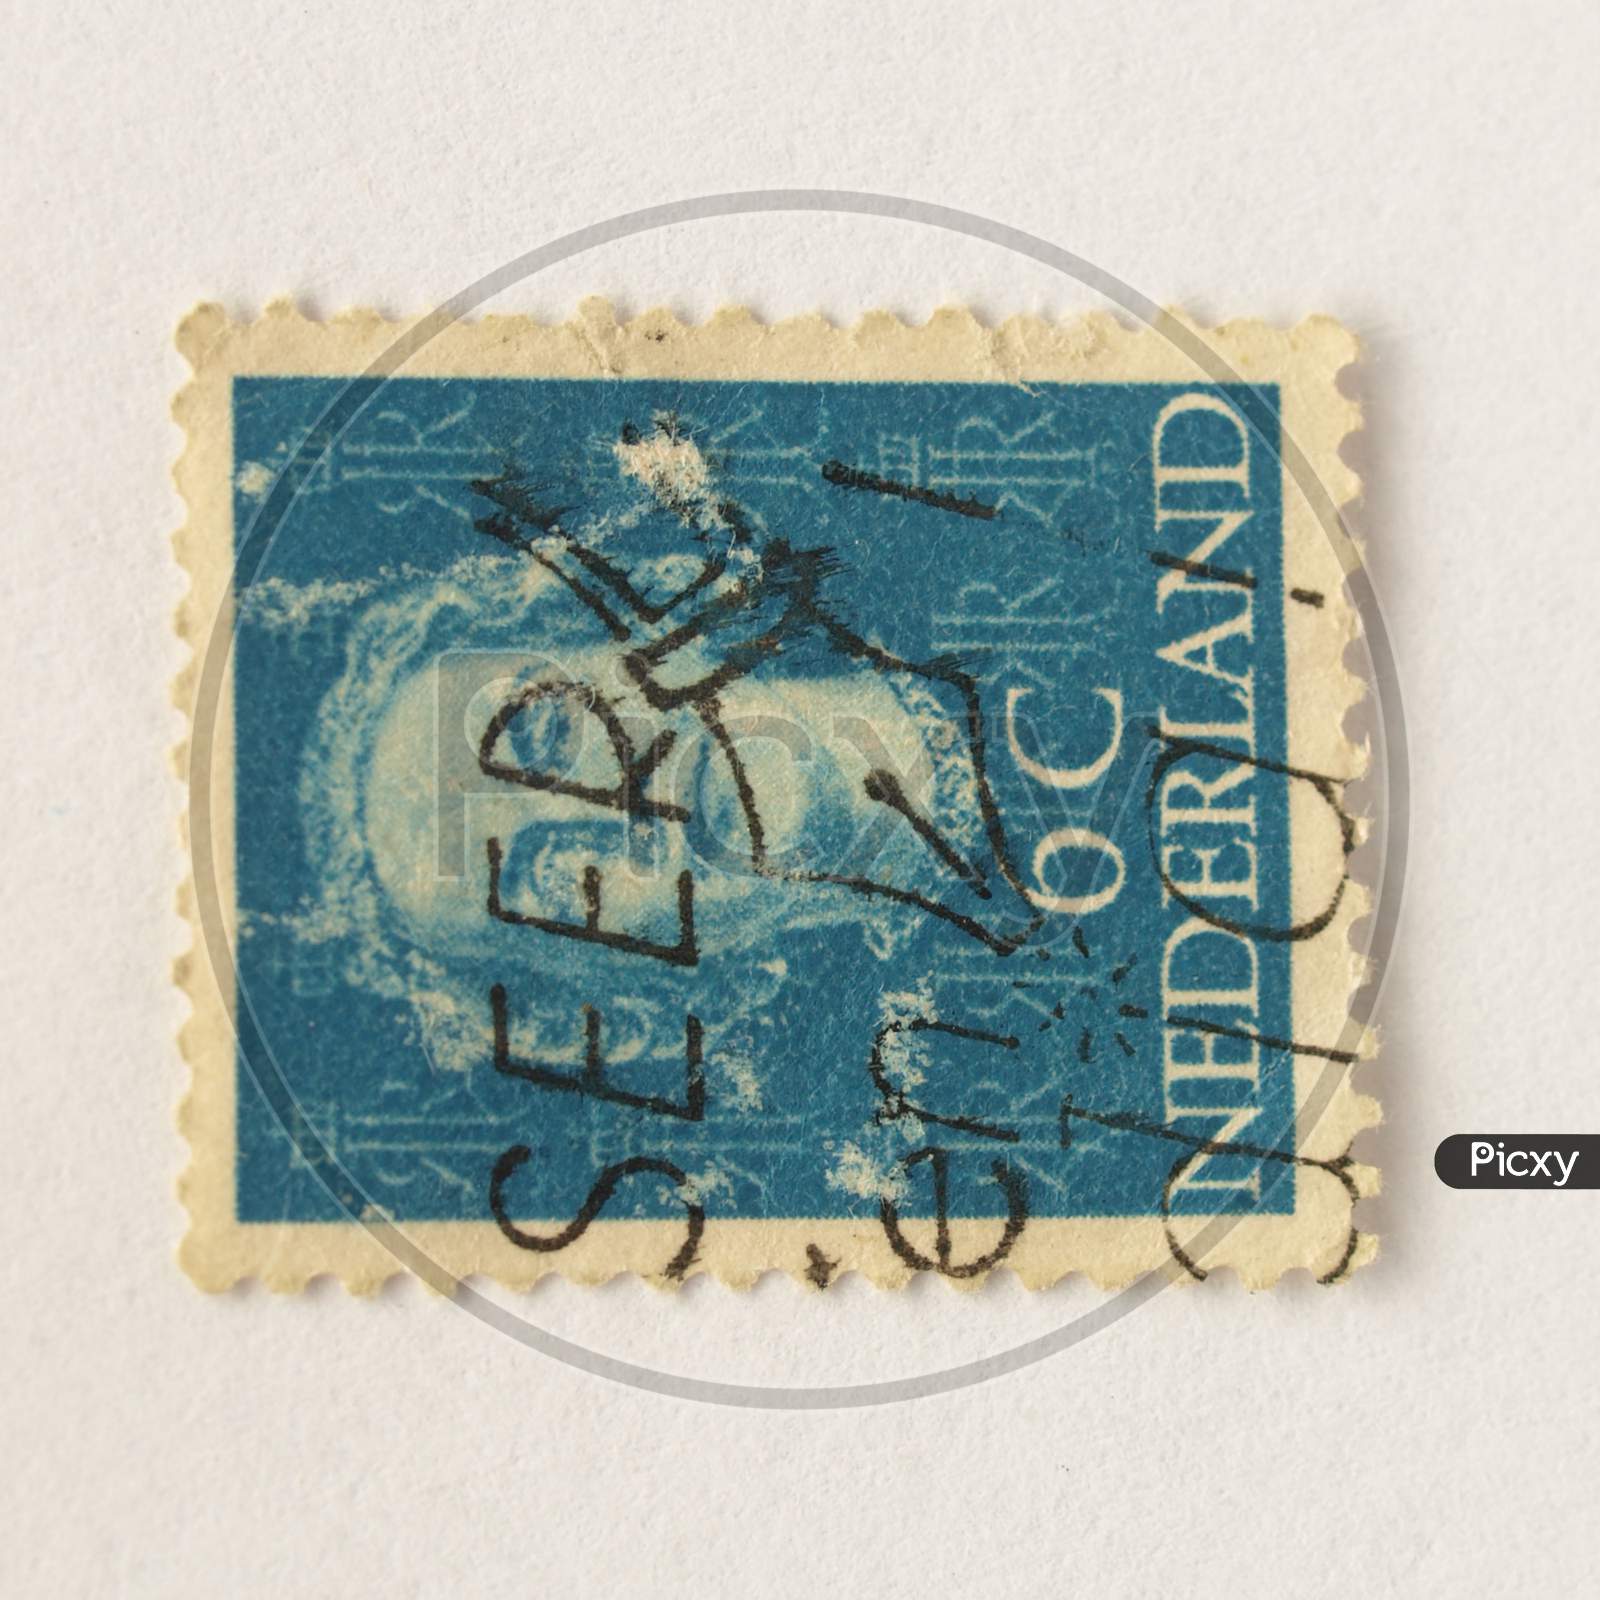 Stamp Of The Netherlands (In European Union)